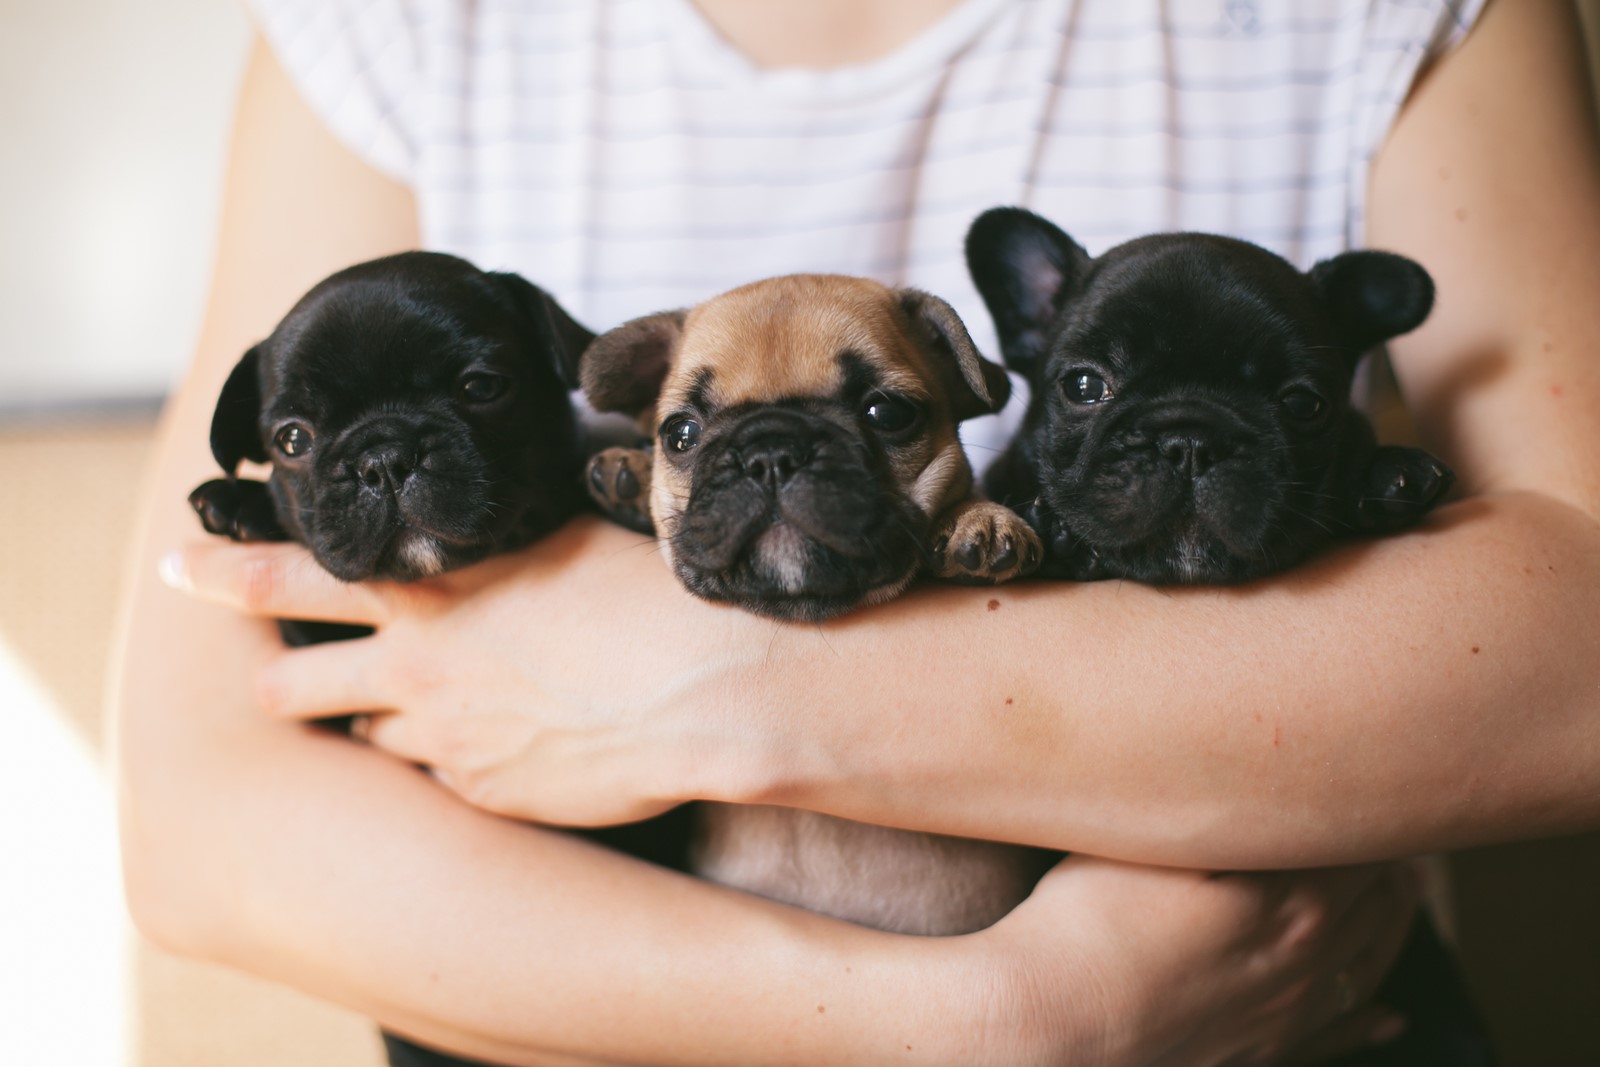 Dog Breeds 101: Things a Brachycephalic Breed Owner Needs to Know